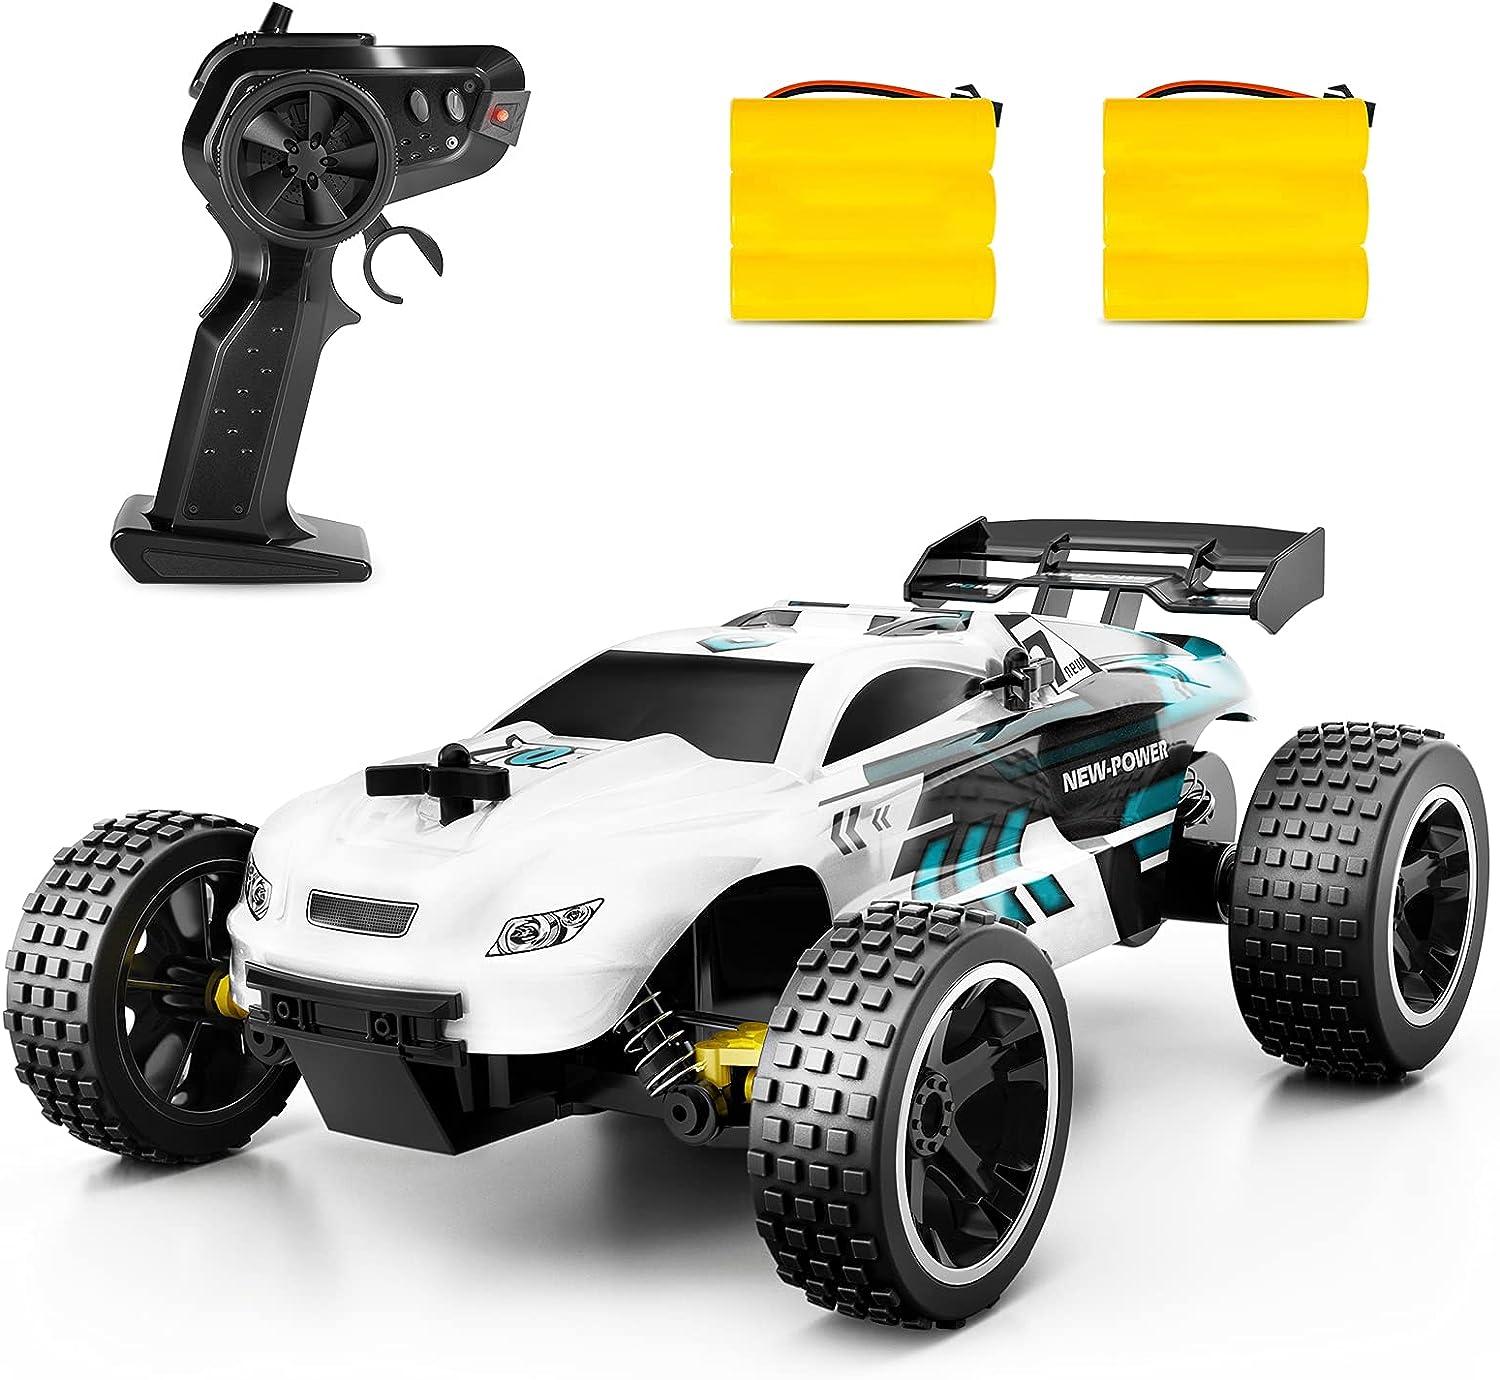 Fastest Remote Control Car In The World: Benefits of Fast Remote Control Cars: Racing, Skill Development, and More!